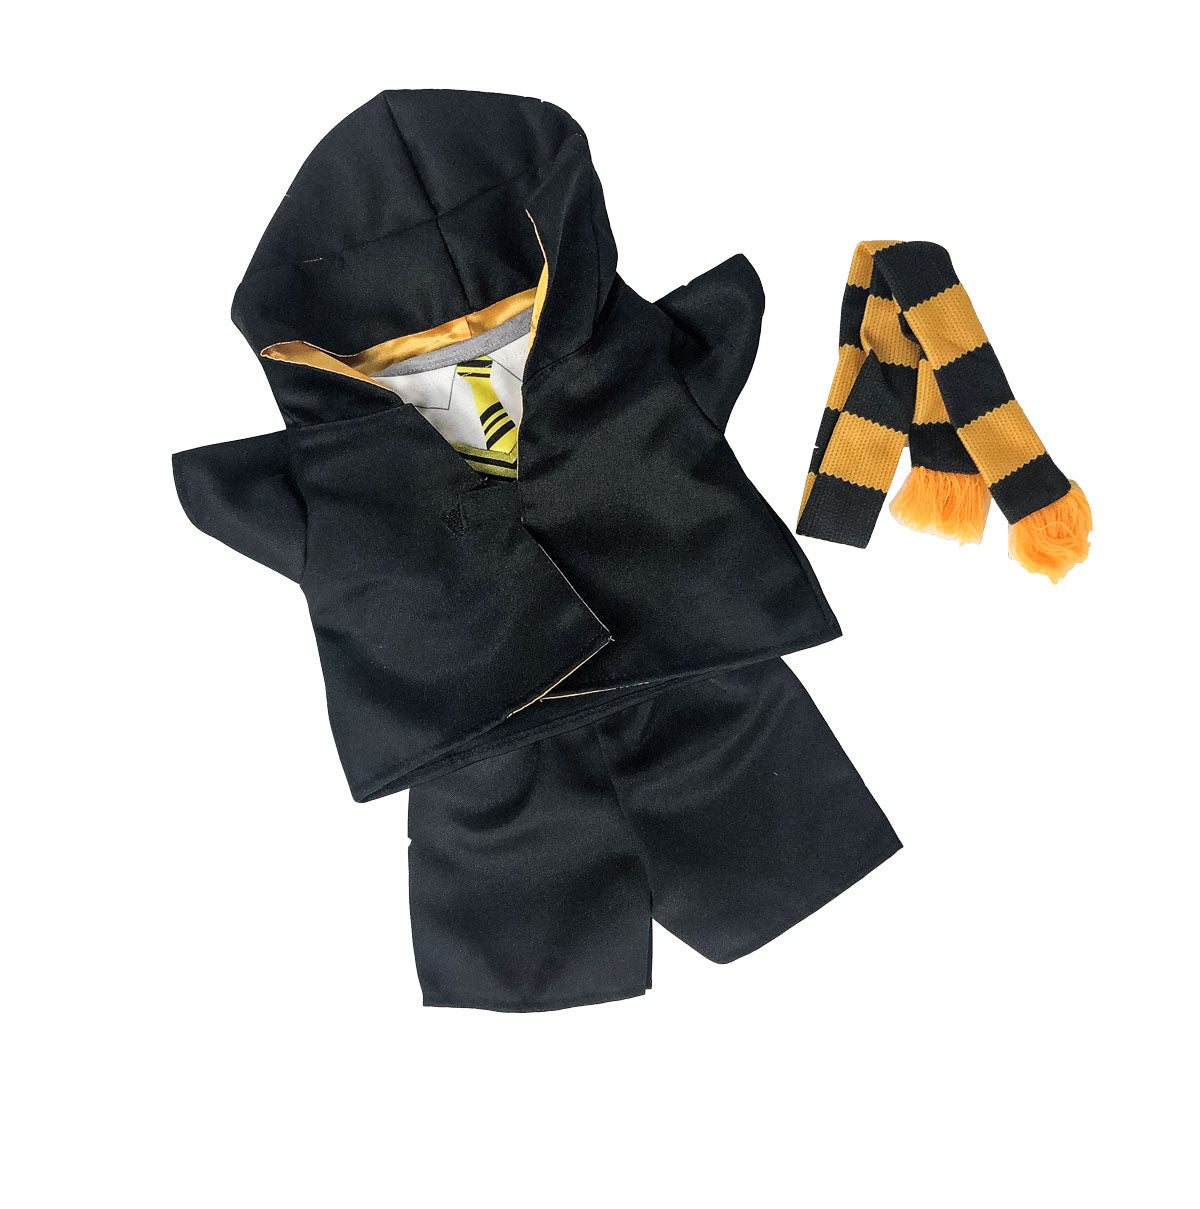 FFCC Clothes - Wizard Costume for 16" Plush